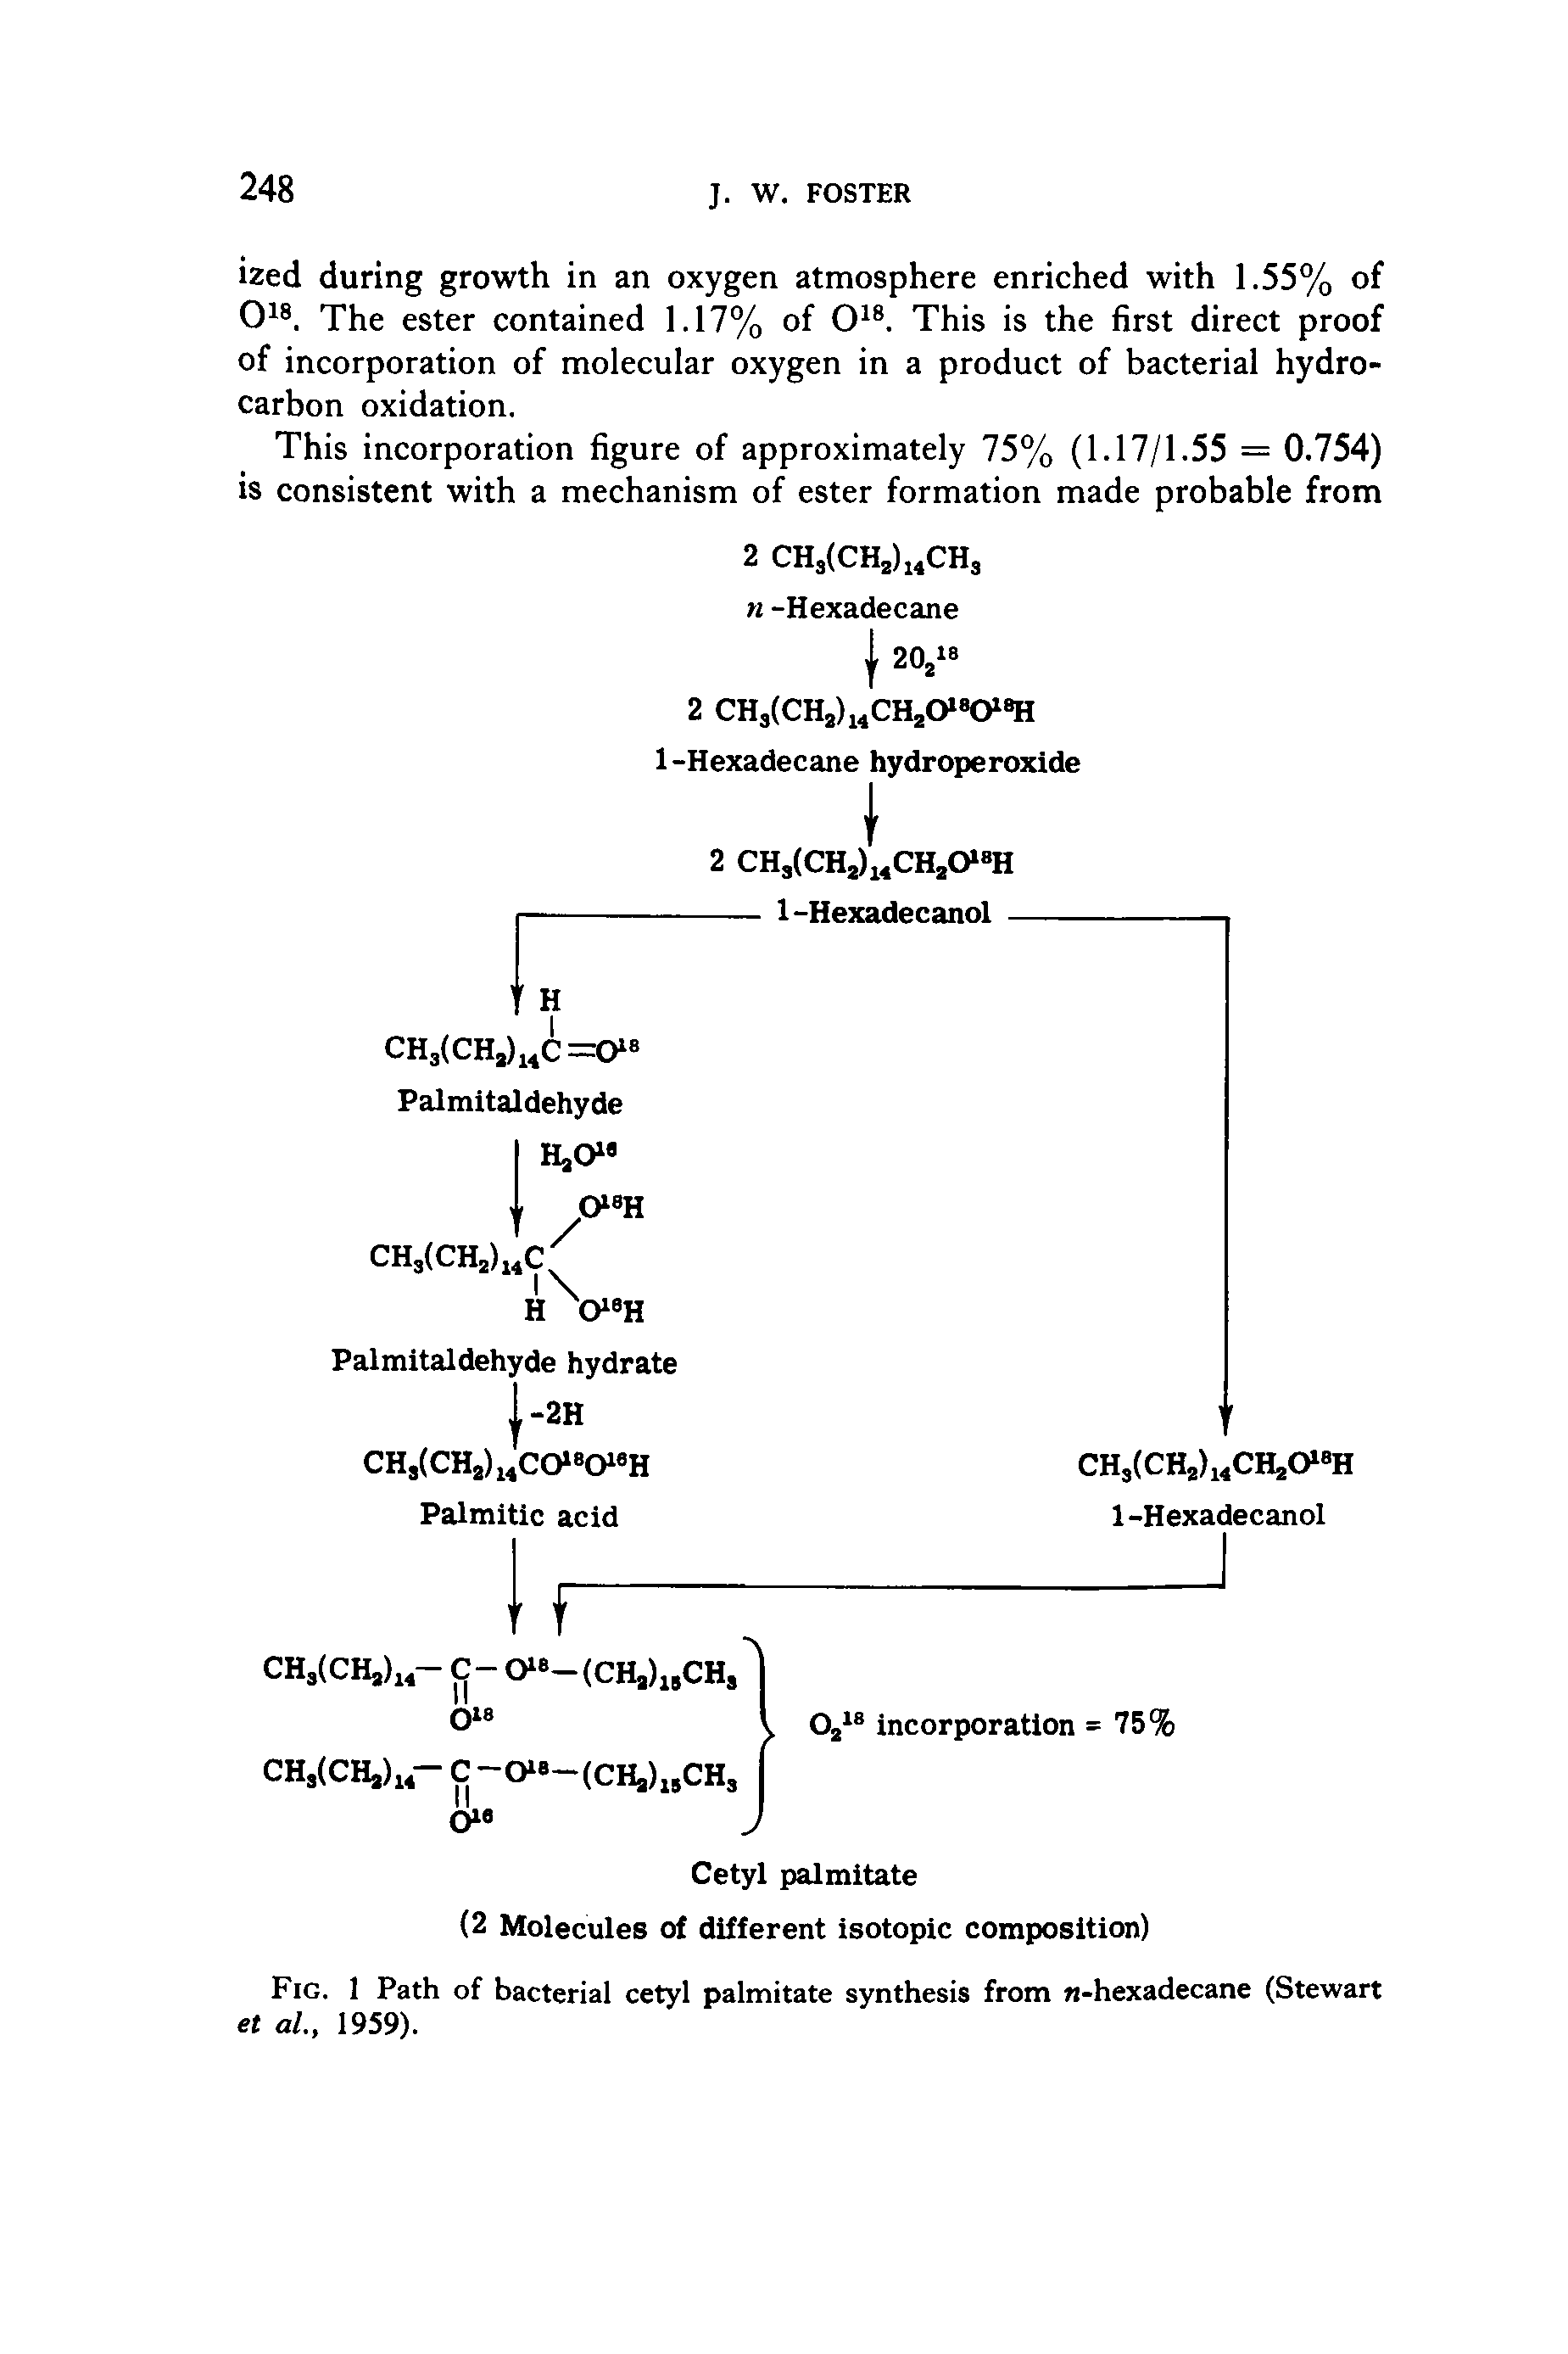 Fig. 1 Path of bacterial cetyl palmitate synthesis from -hexadecane (Stewart et al 1959).